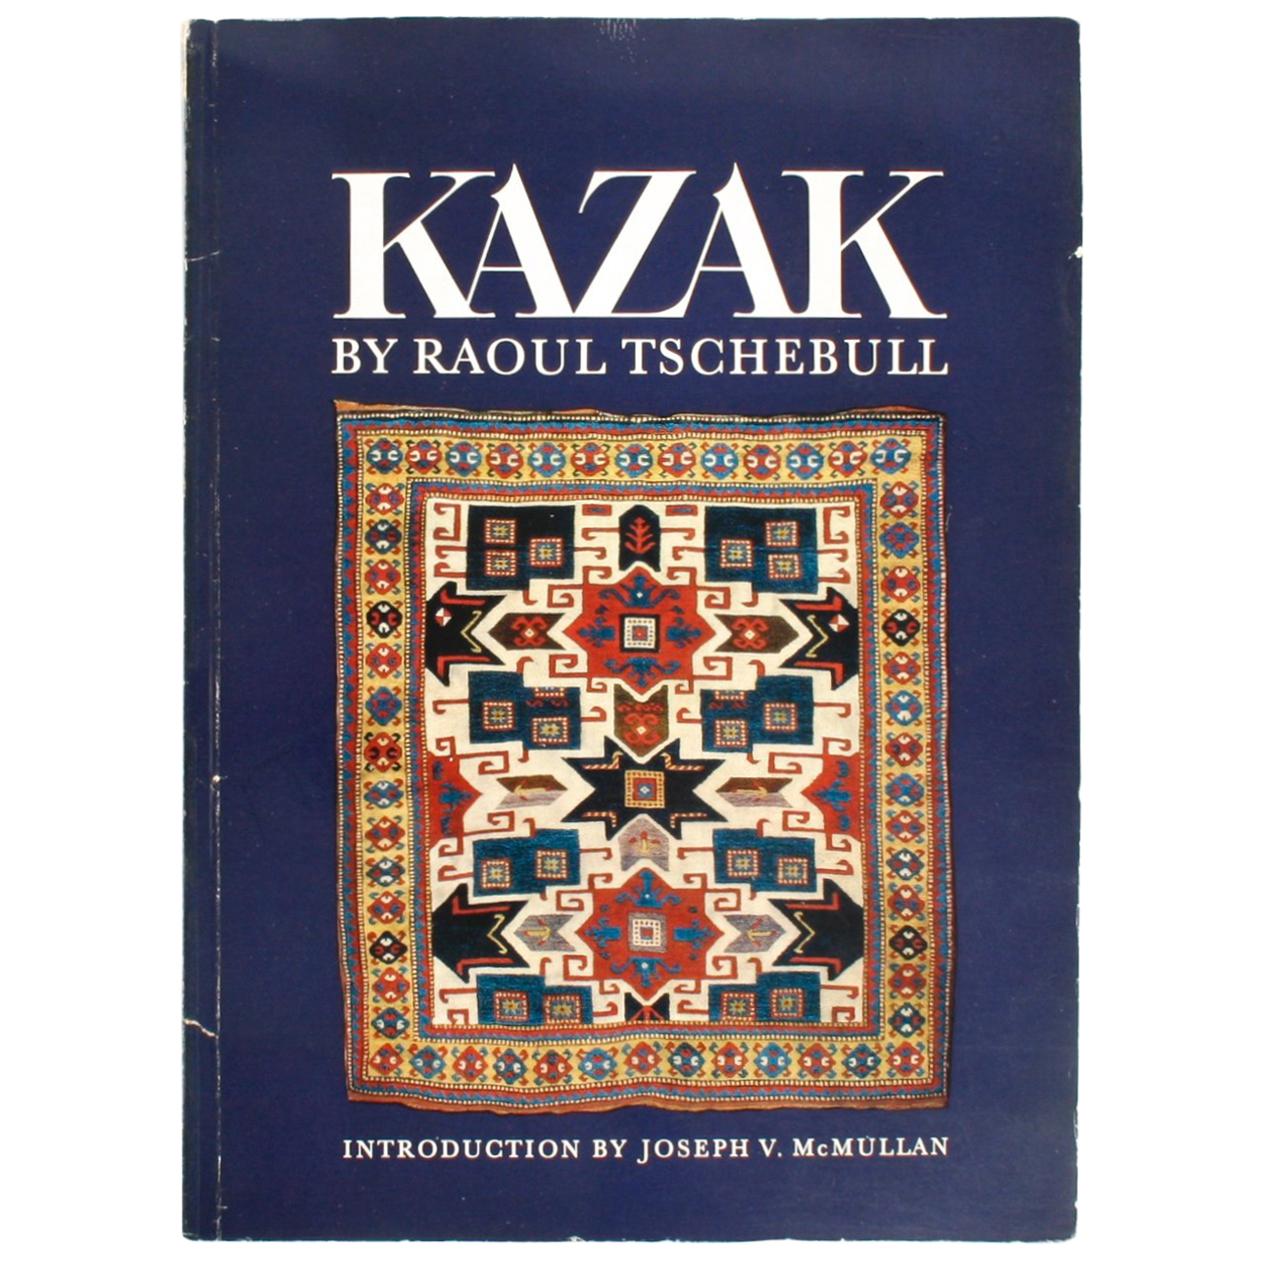 Kazak Carpets of the Caucasus by Raoul Tschebull